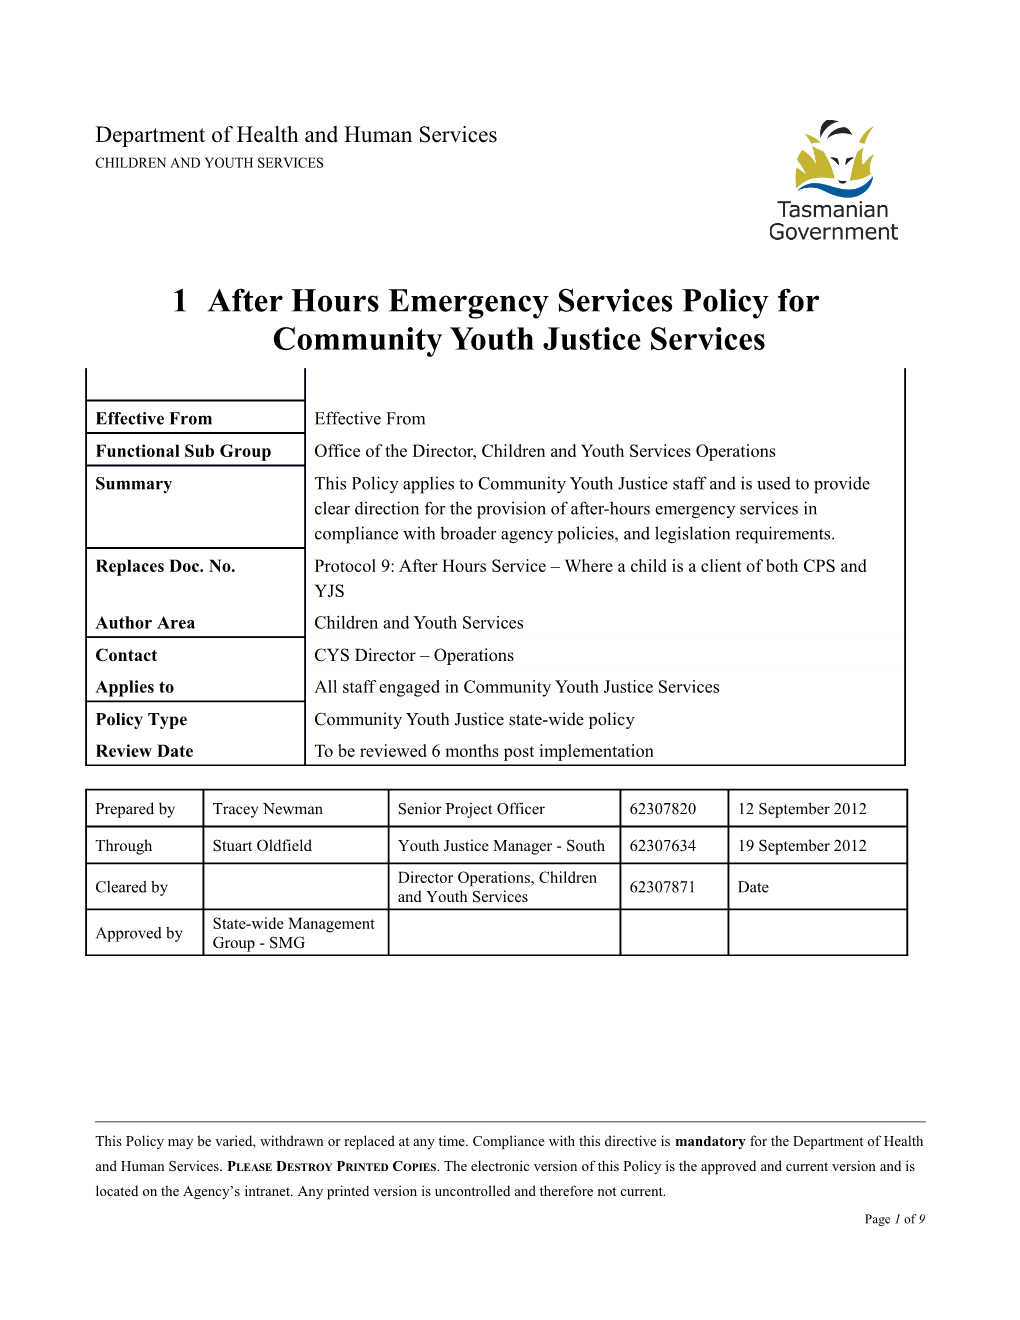 After Hours Emergency Services Policy for Community Youth Justice Services